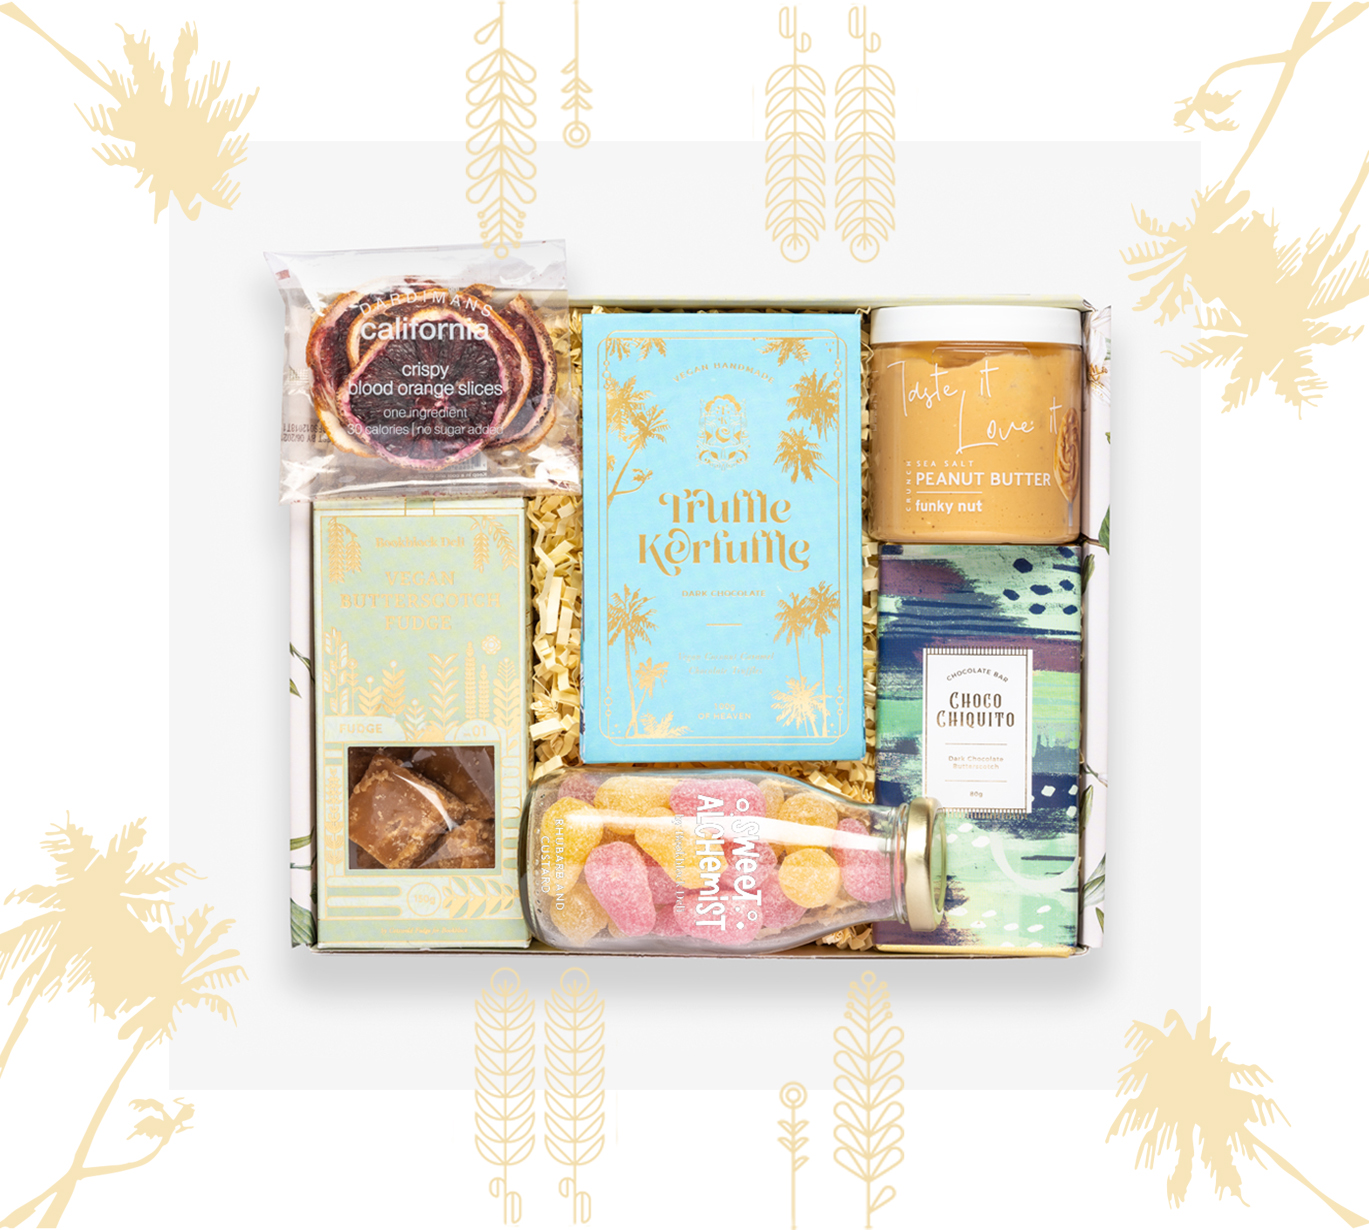 Vegan Sweet Shop Gift Box with decorative details